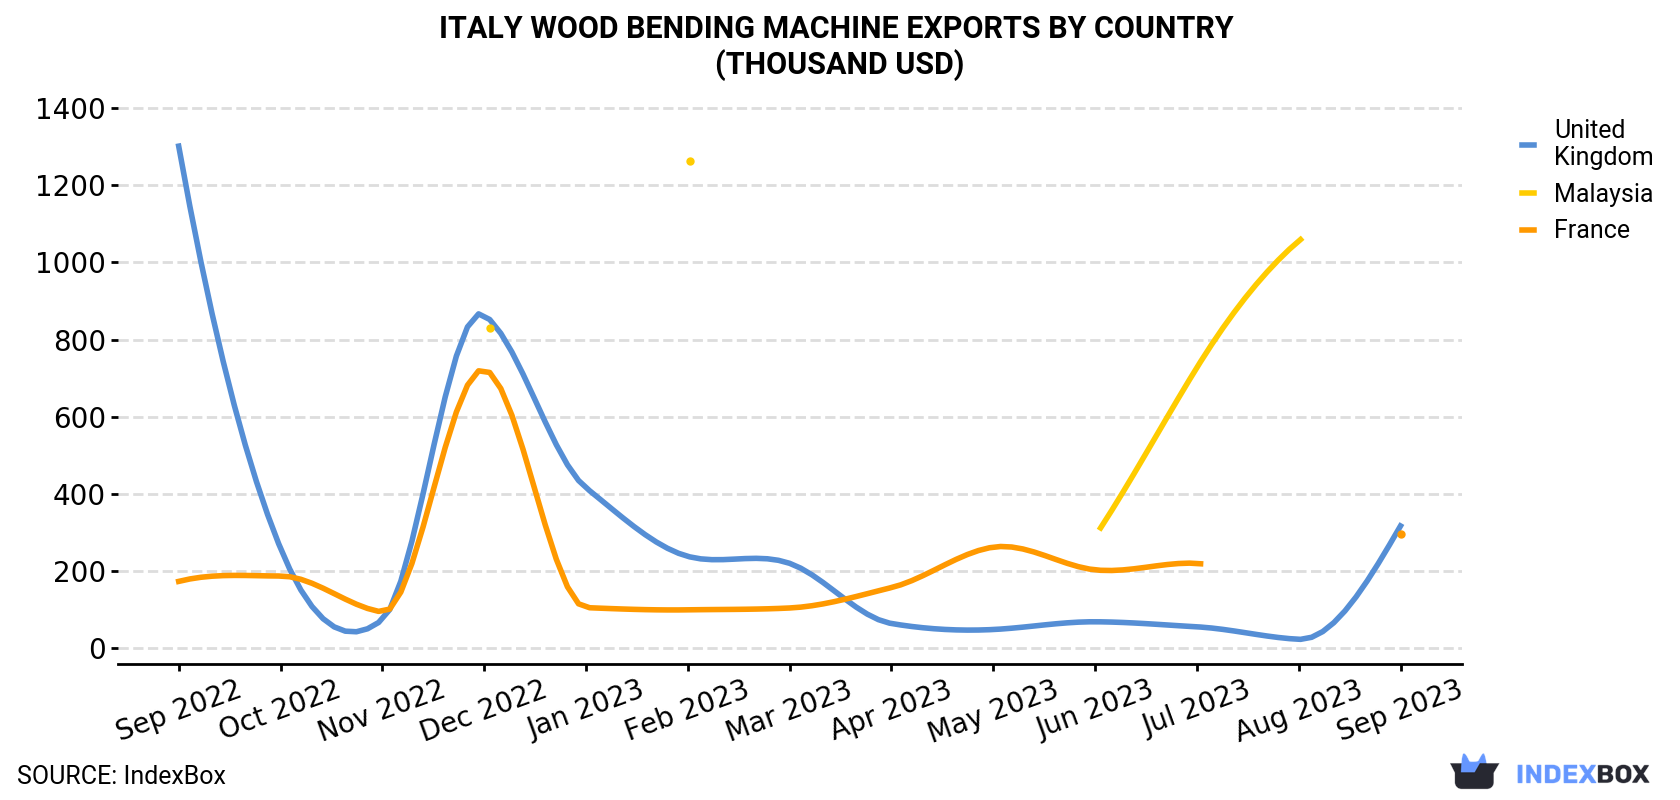 Italy Wood Bending Machine Exports By Country (Thousand USD)